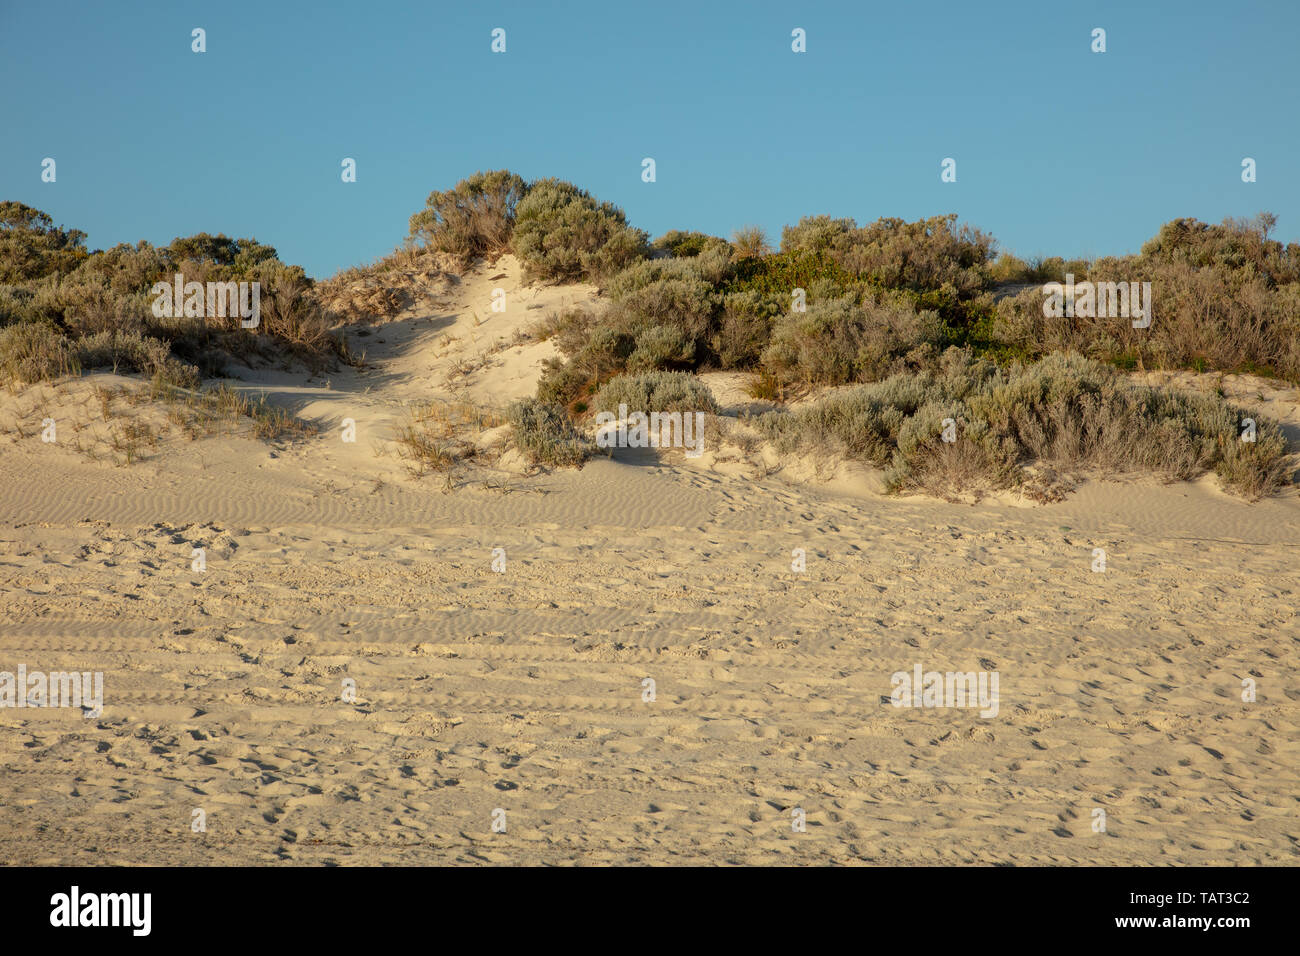 Beach and sand dunes with native plants on Mullaloo beach, Joondalup, Perth, Western Australia on a late afternoon before sunset in May. Stock Photo